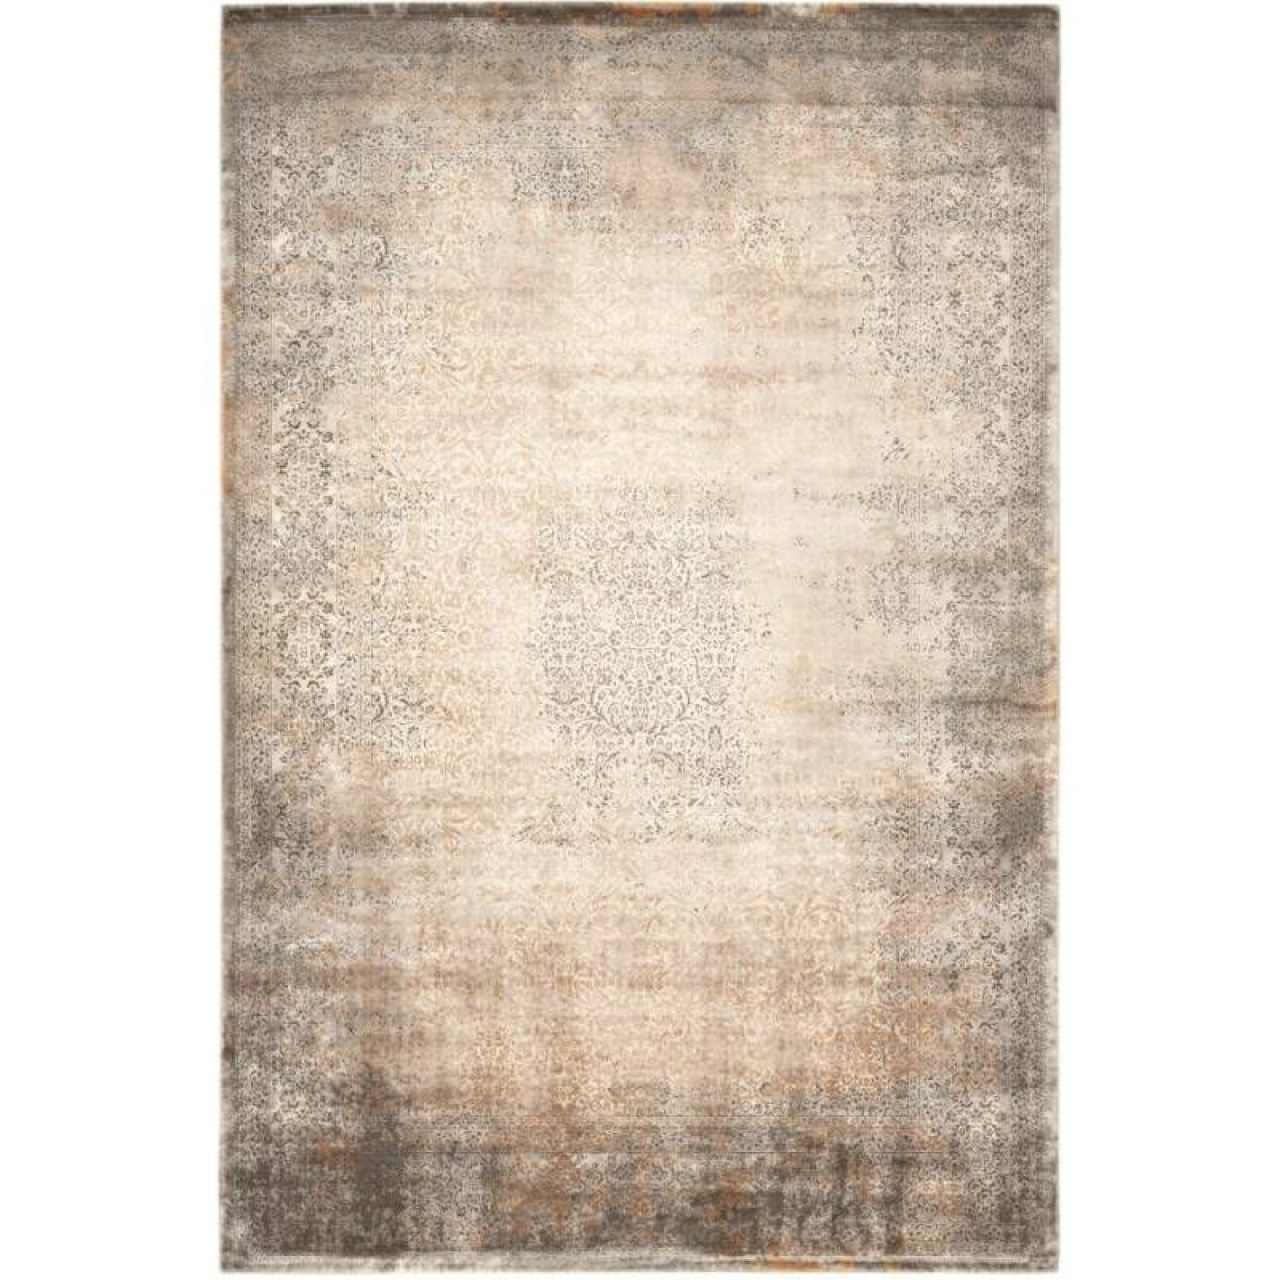 Obsession Haute Couture Jewel 954 Taupe szőnyeg-80x150